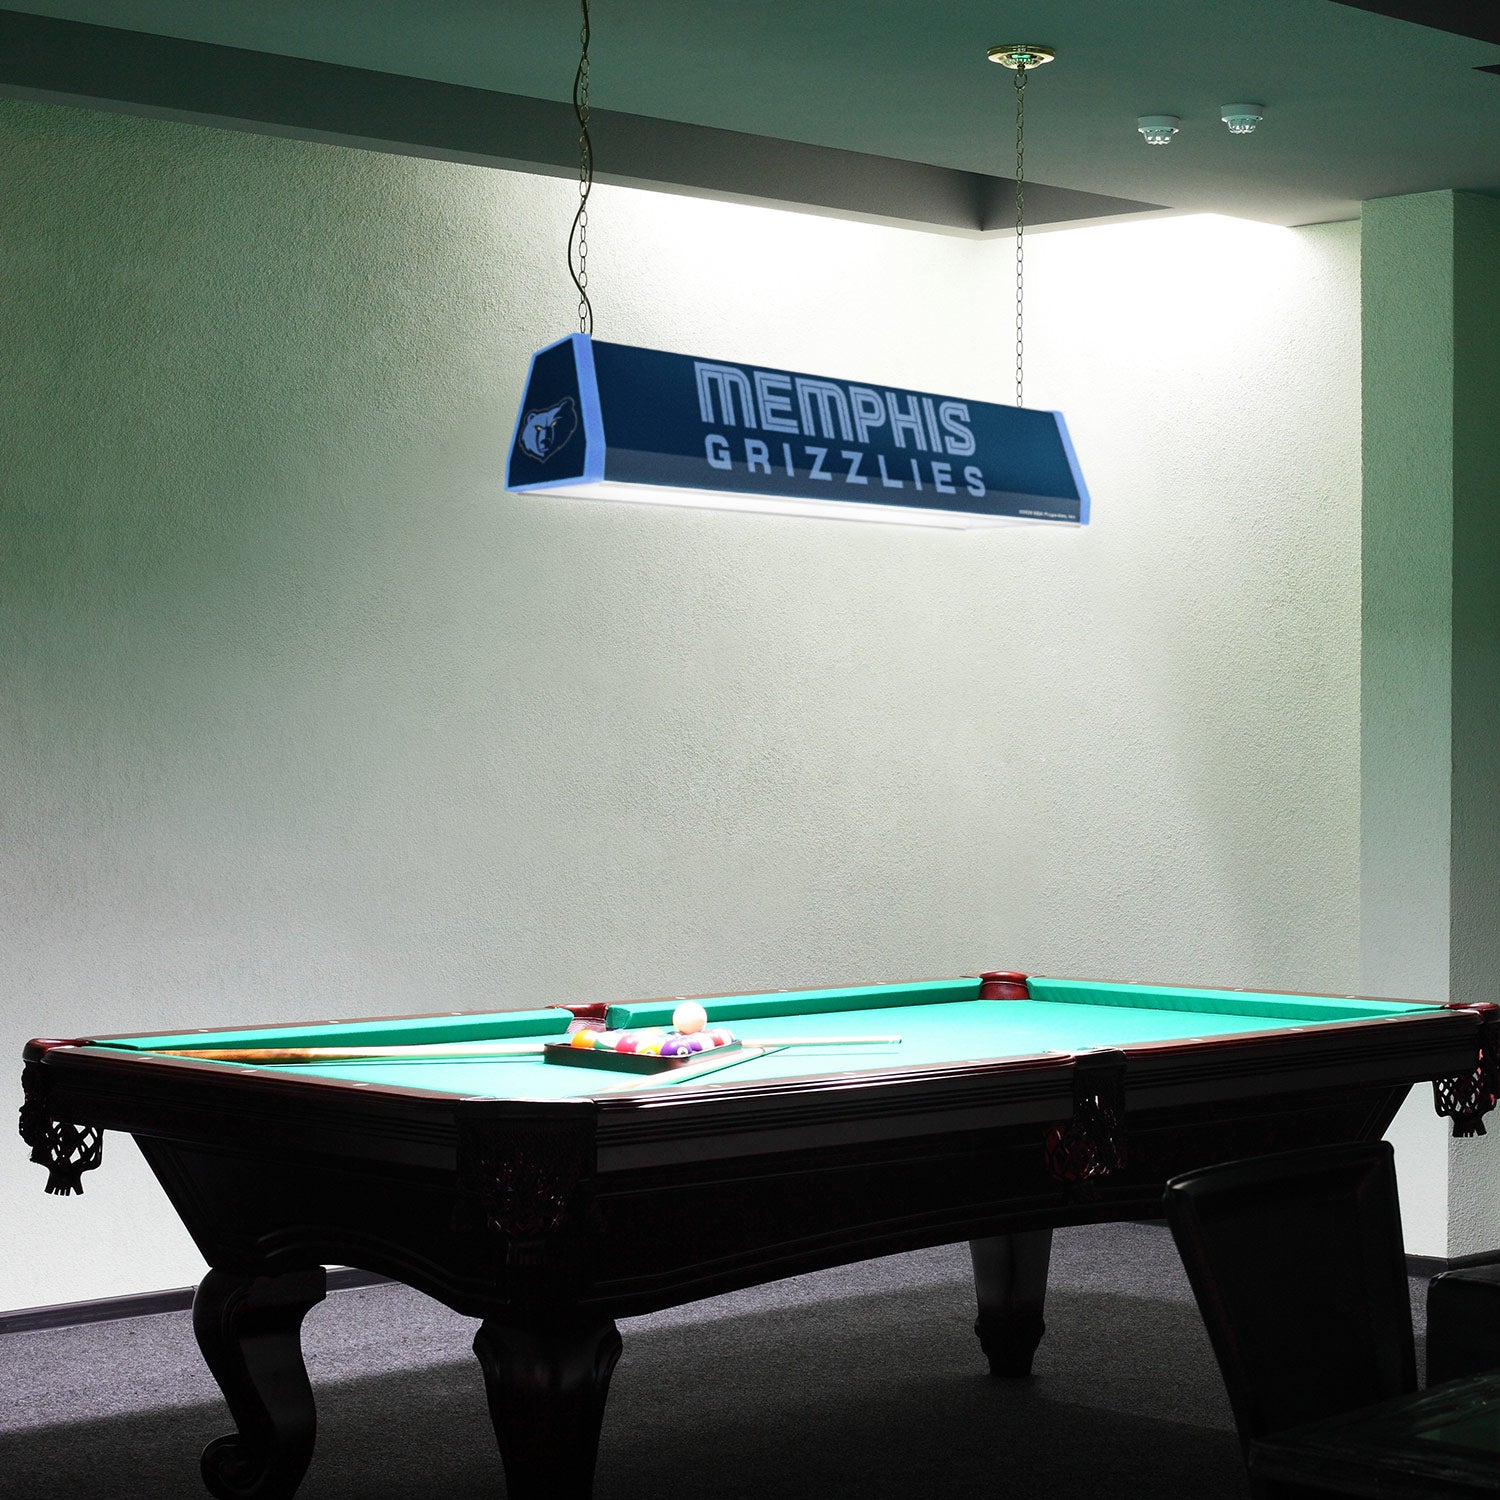 Memphis Grizzlies Standard Pool Table Light Room View